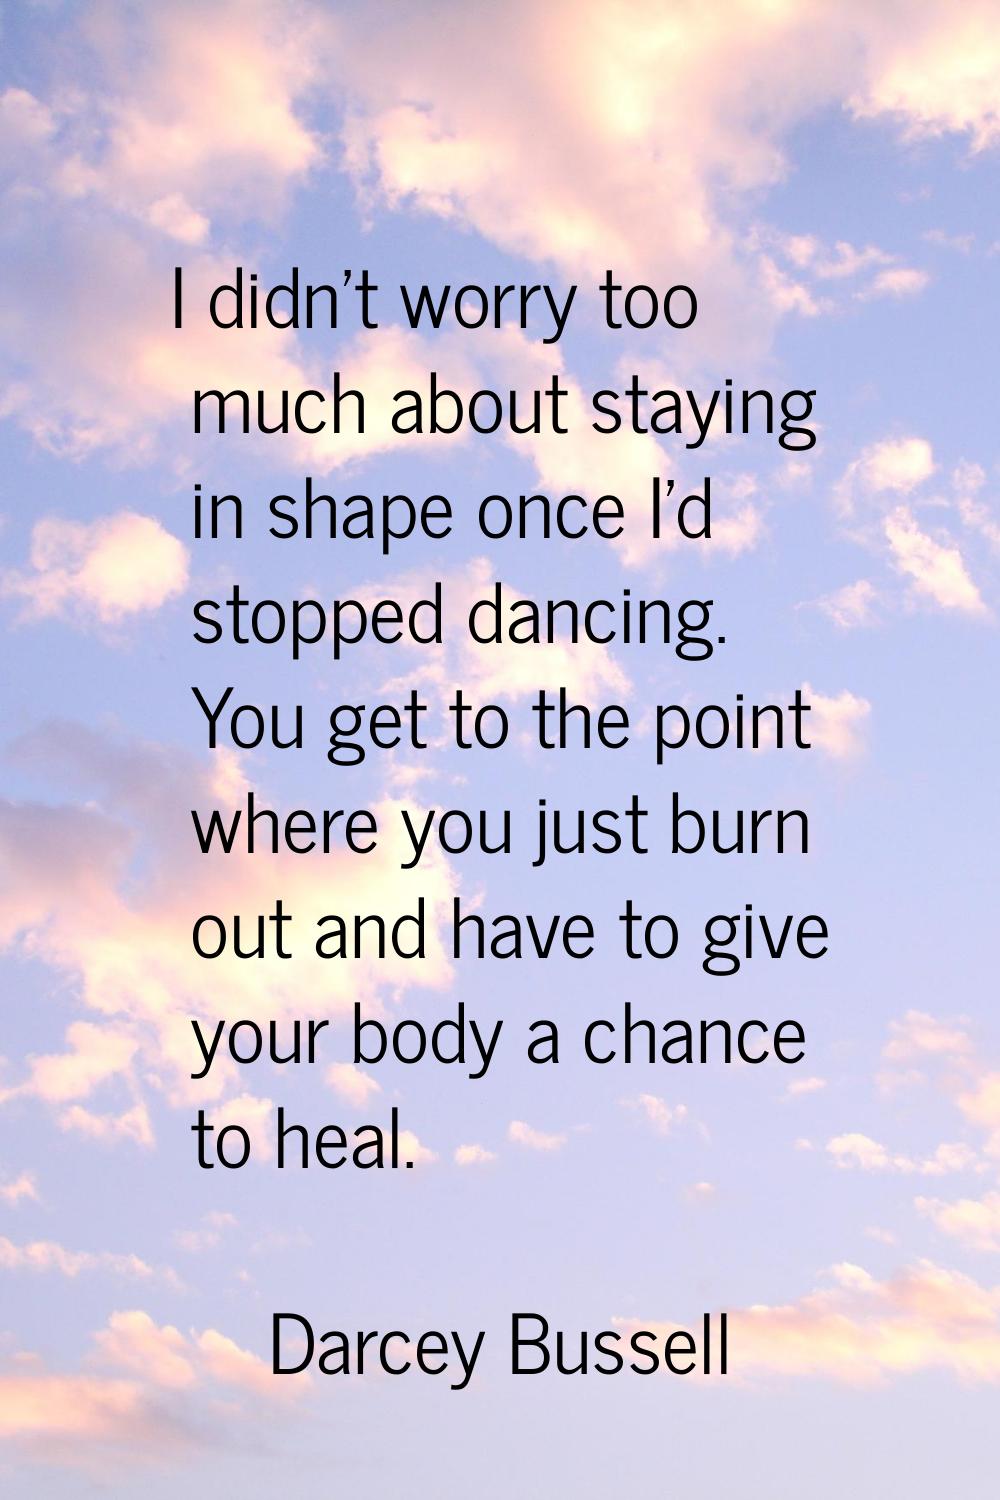 I didn't worry too much about staying in shape once I'd stopped dancing. You get to the point where